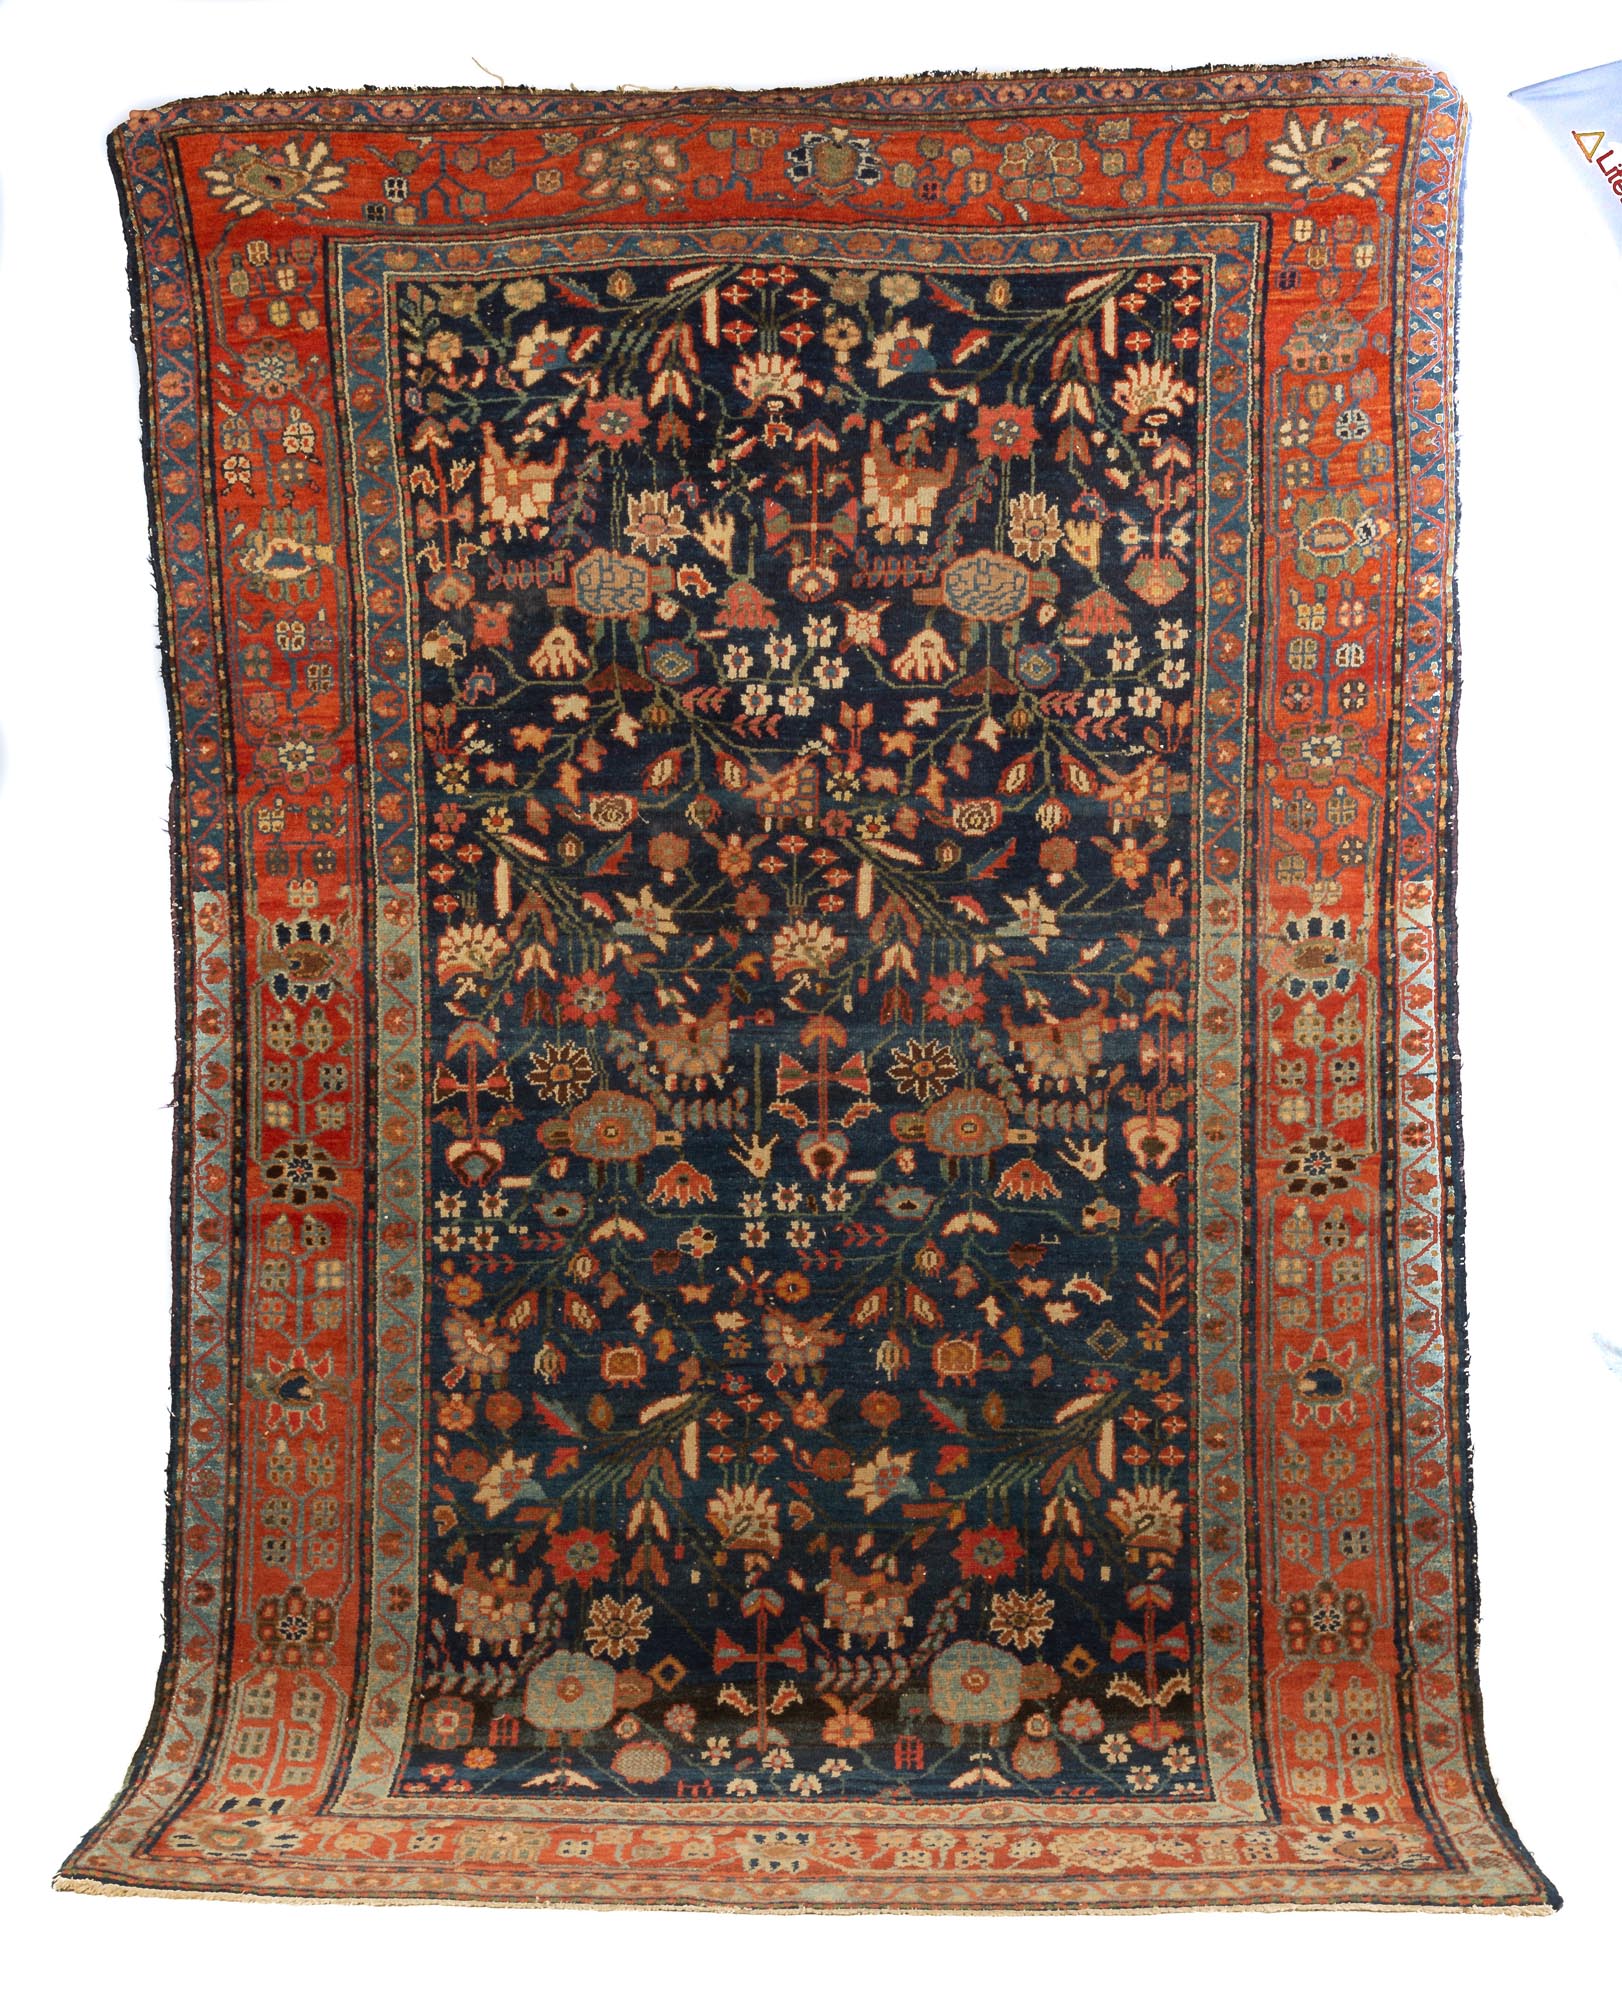 Malayar Oriental Rug. Some loss to end border. 6'2" x 4'1". Online bidding available: https://live.